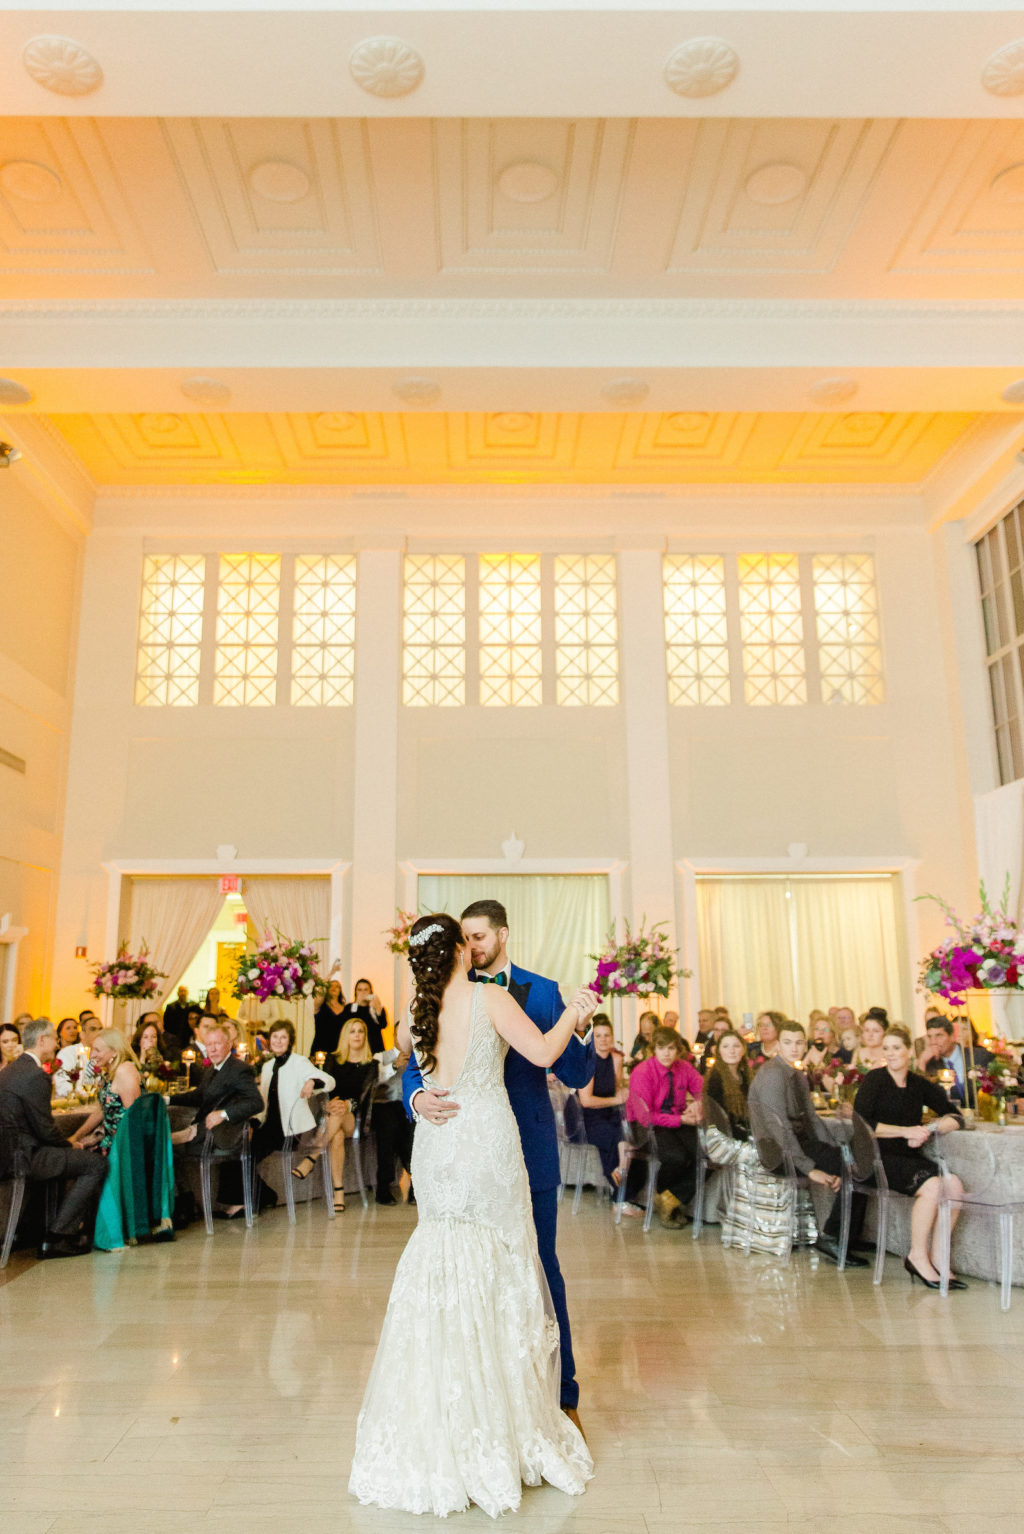 Bride and Groom First Dance Photo | Downtown Tampa Wedding Venue The Vault